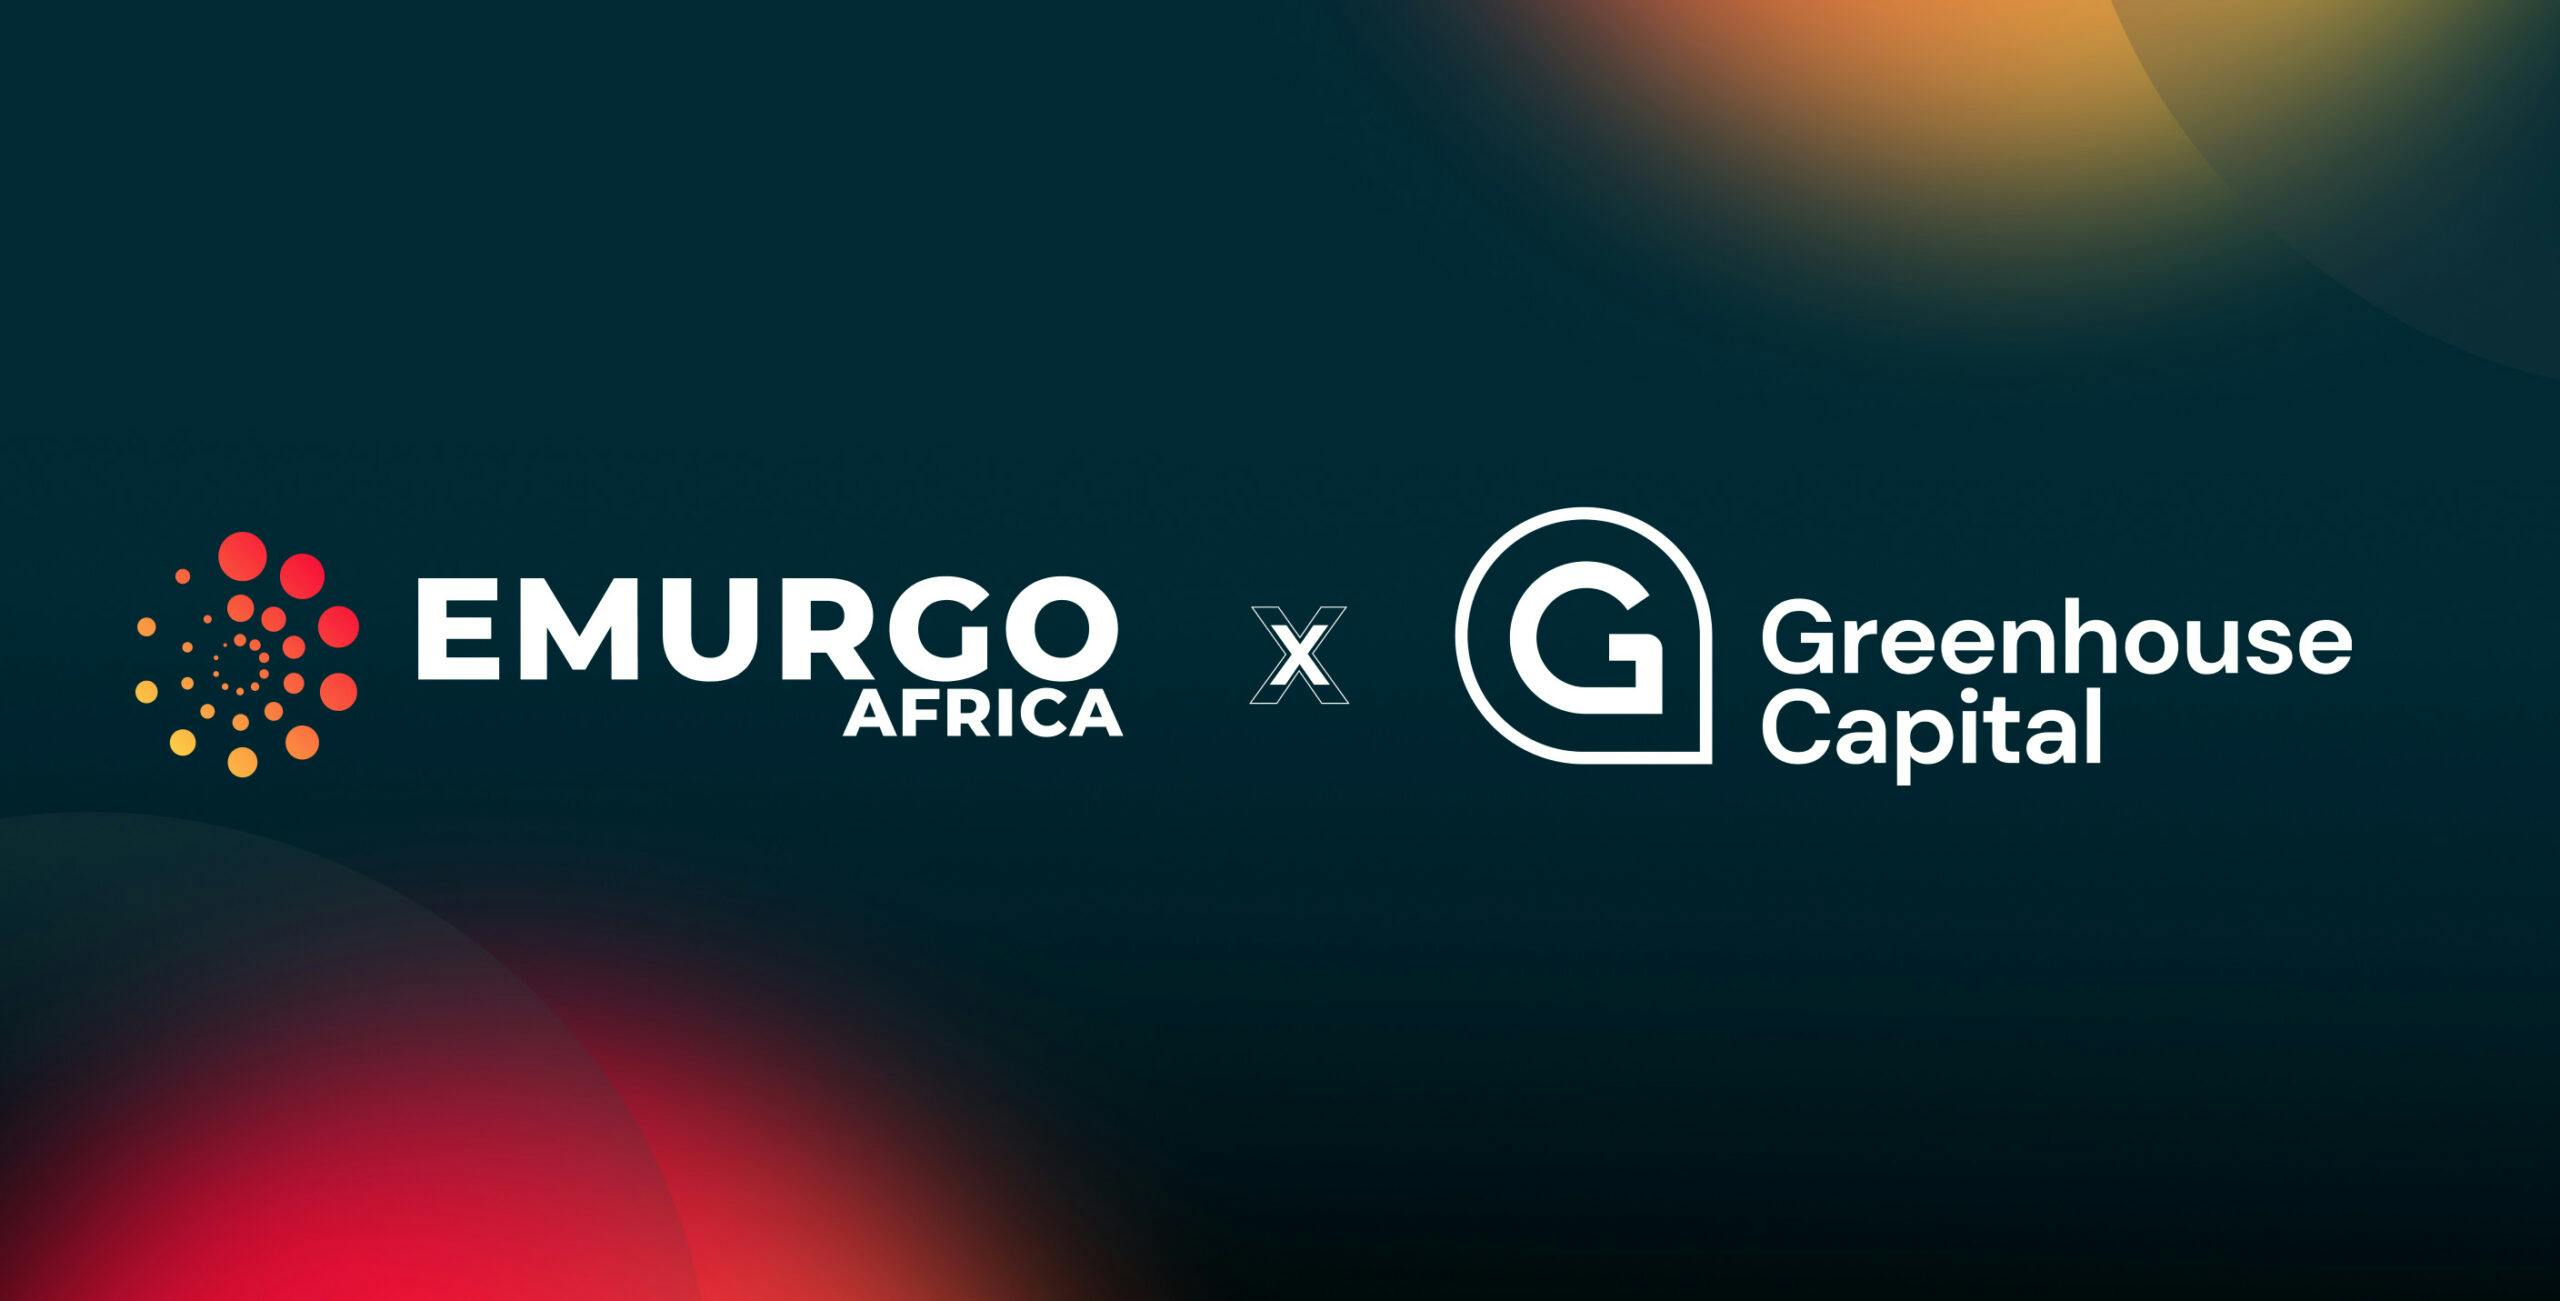 EMURGO-Africa-Partners-with-GreenHouse-Capital-scaled-1.jpg